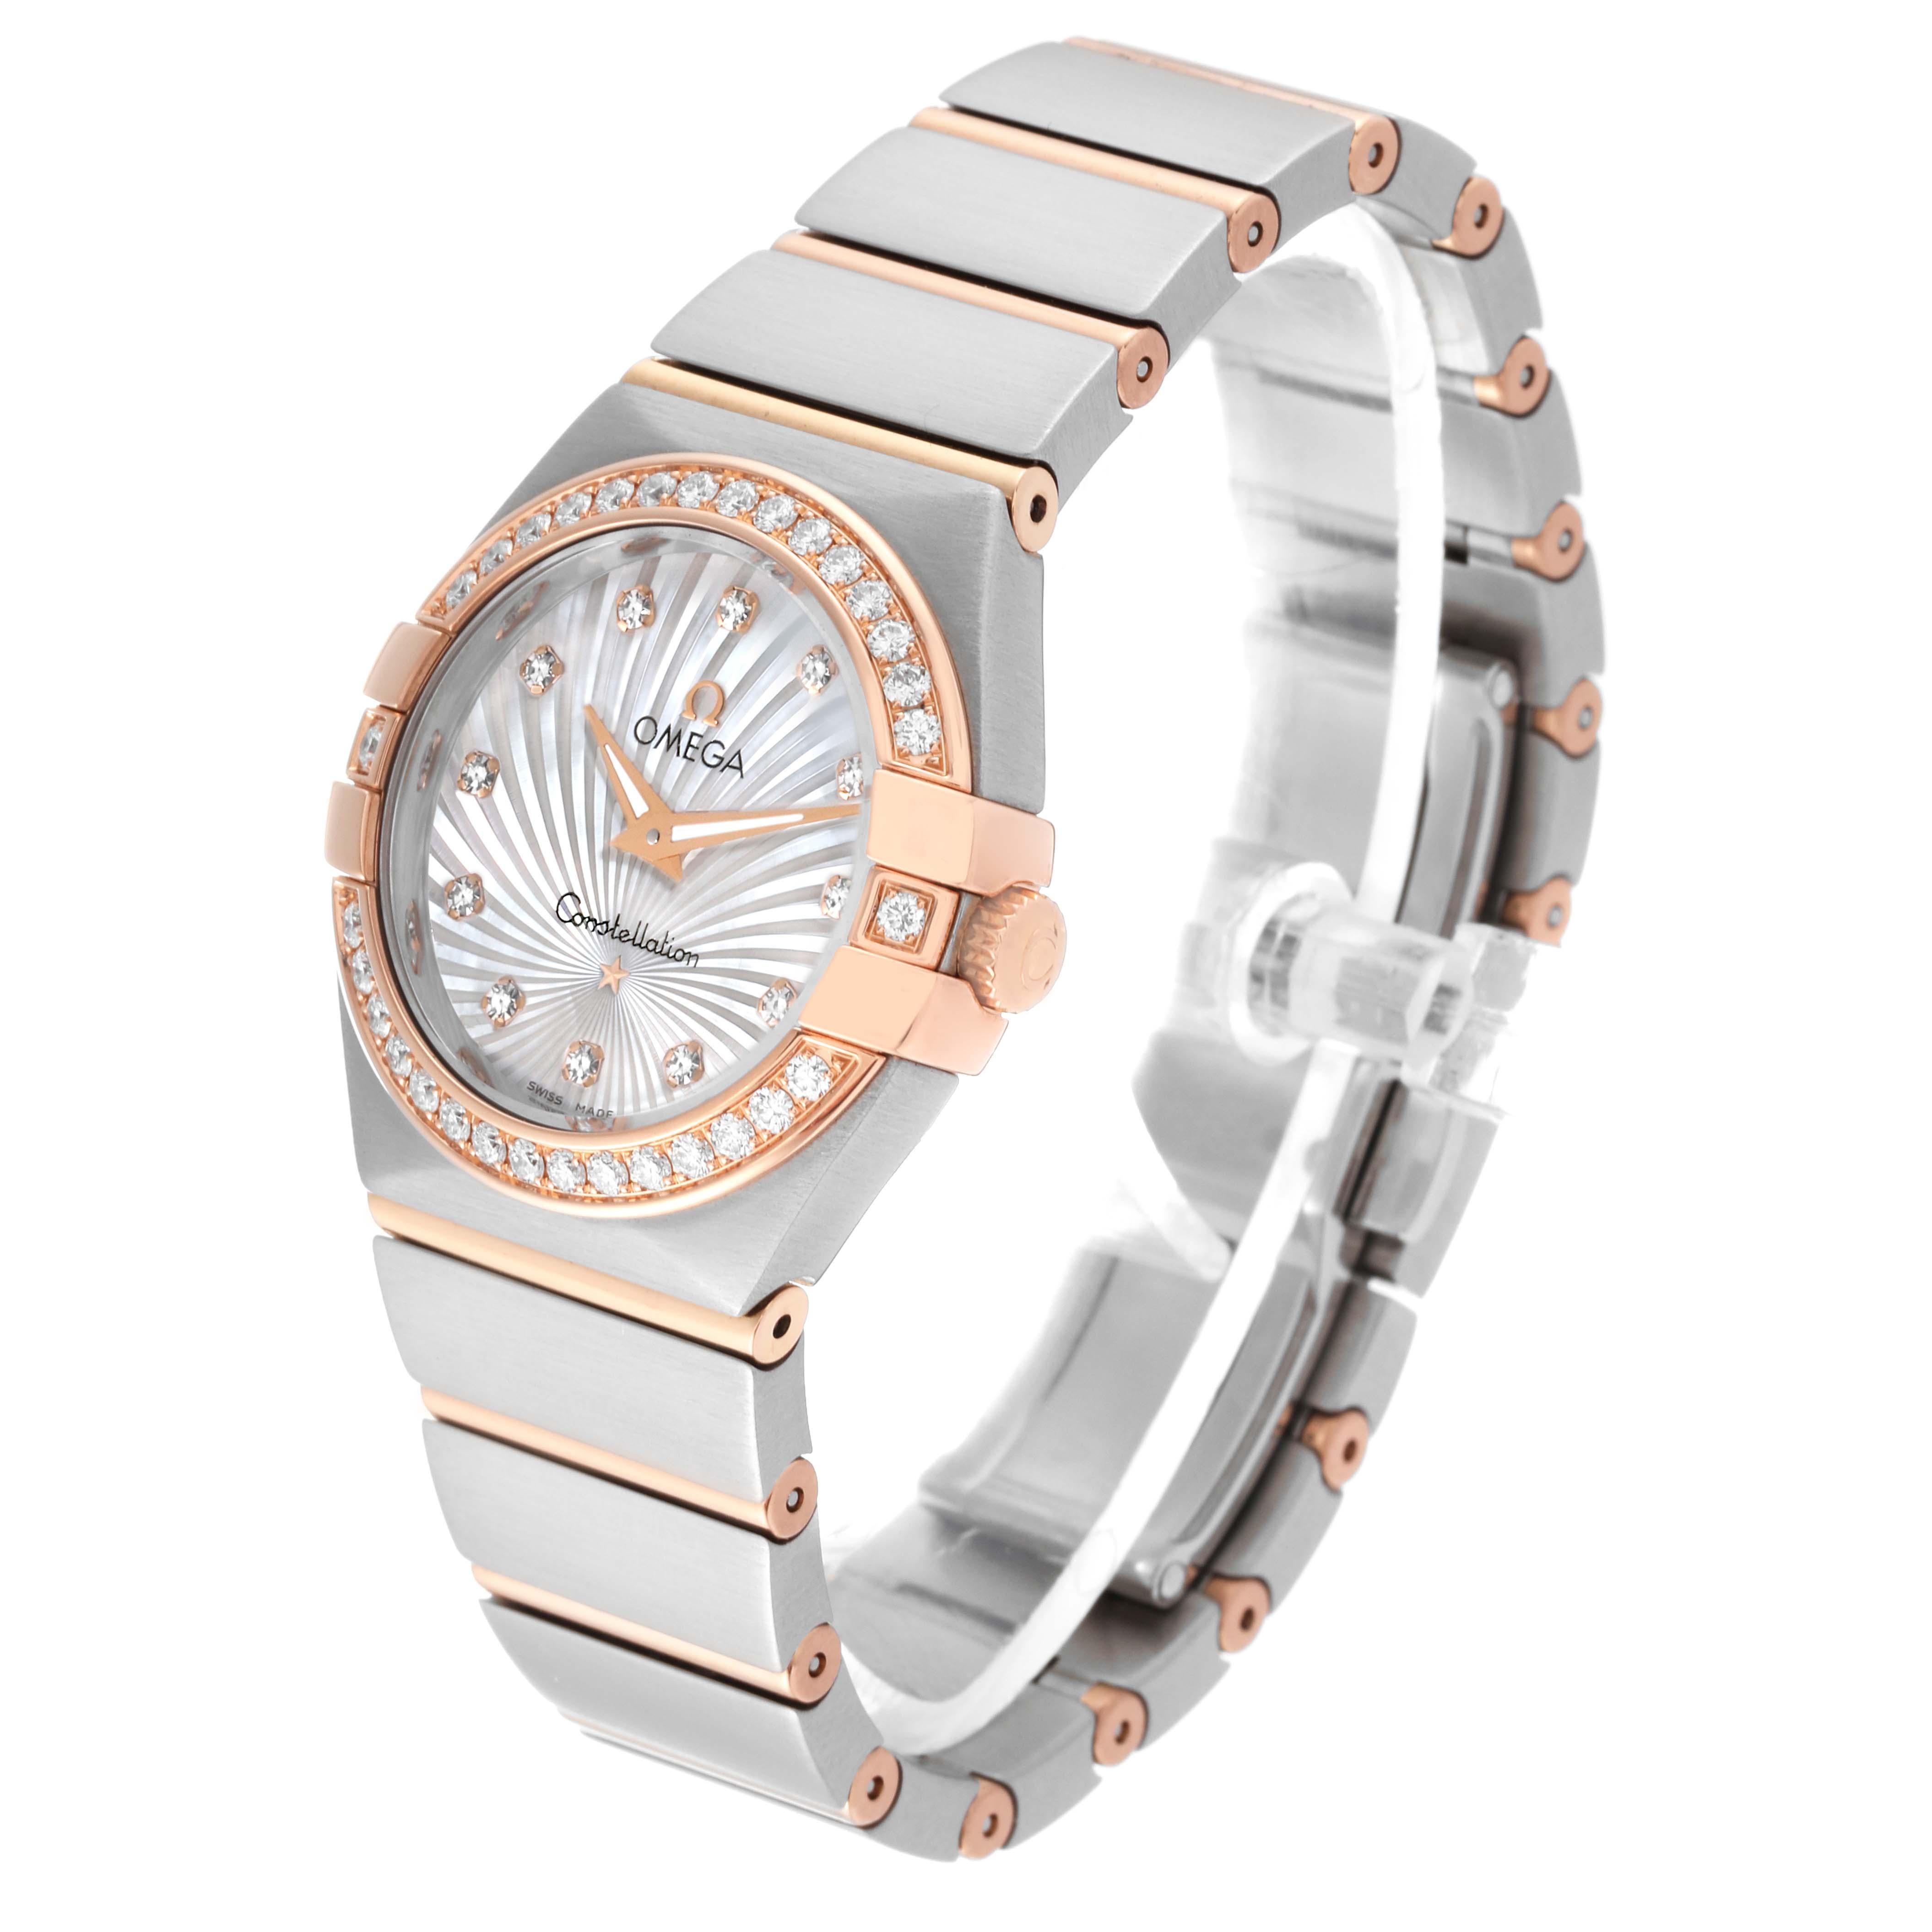 Omega Constellation 27 Steel Rose Gold MOP Diamond Watch 123.25.27.60.55.002 For Sale 5